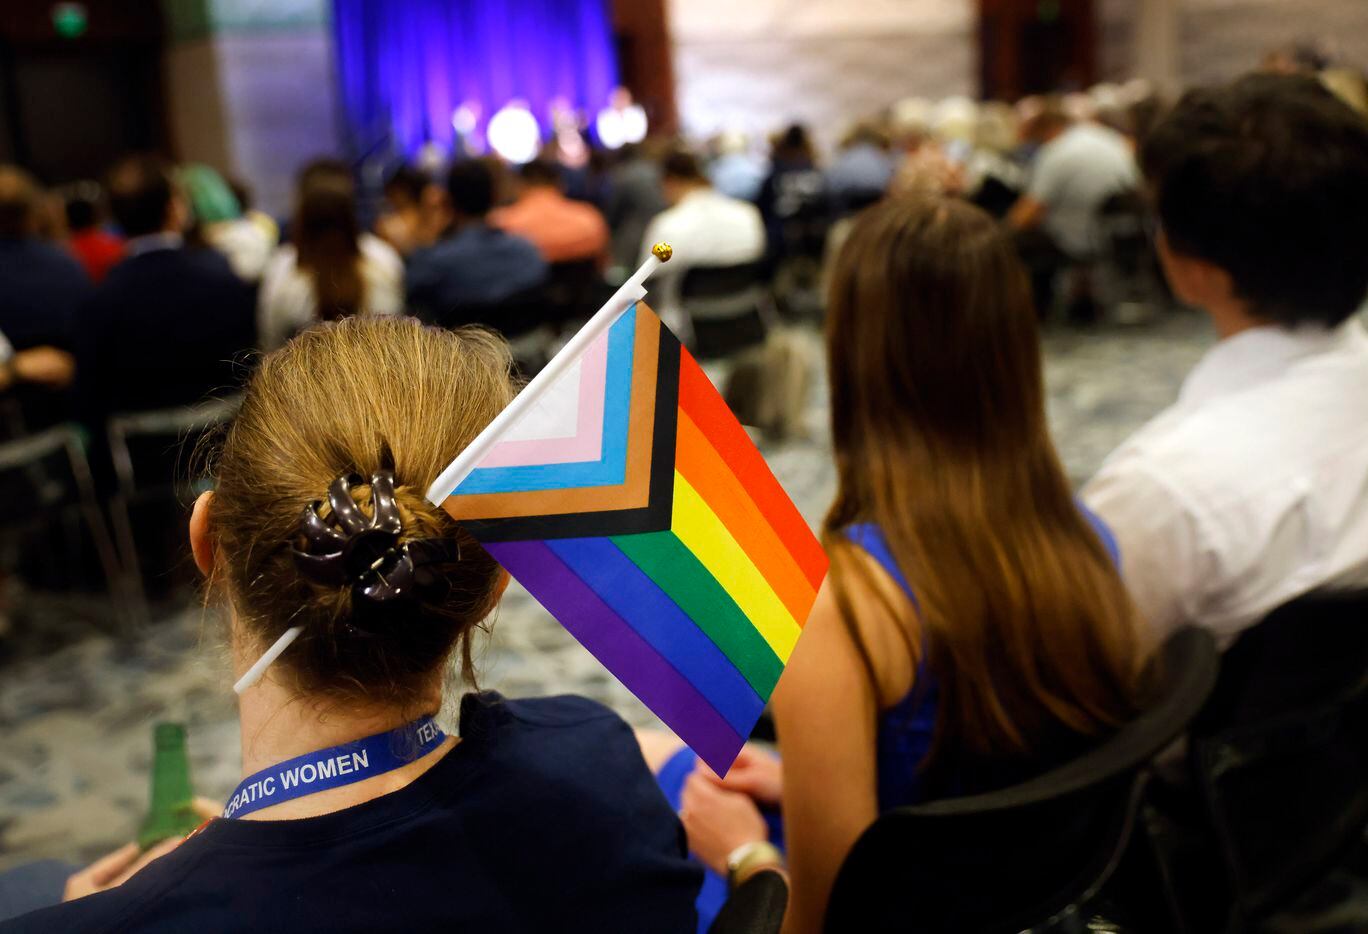 A woman supporting the LGBTQ community wore a flag in her hair during the kick-off reception...